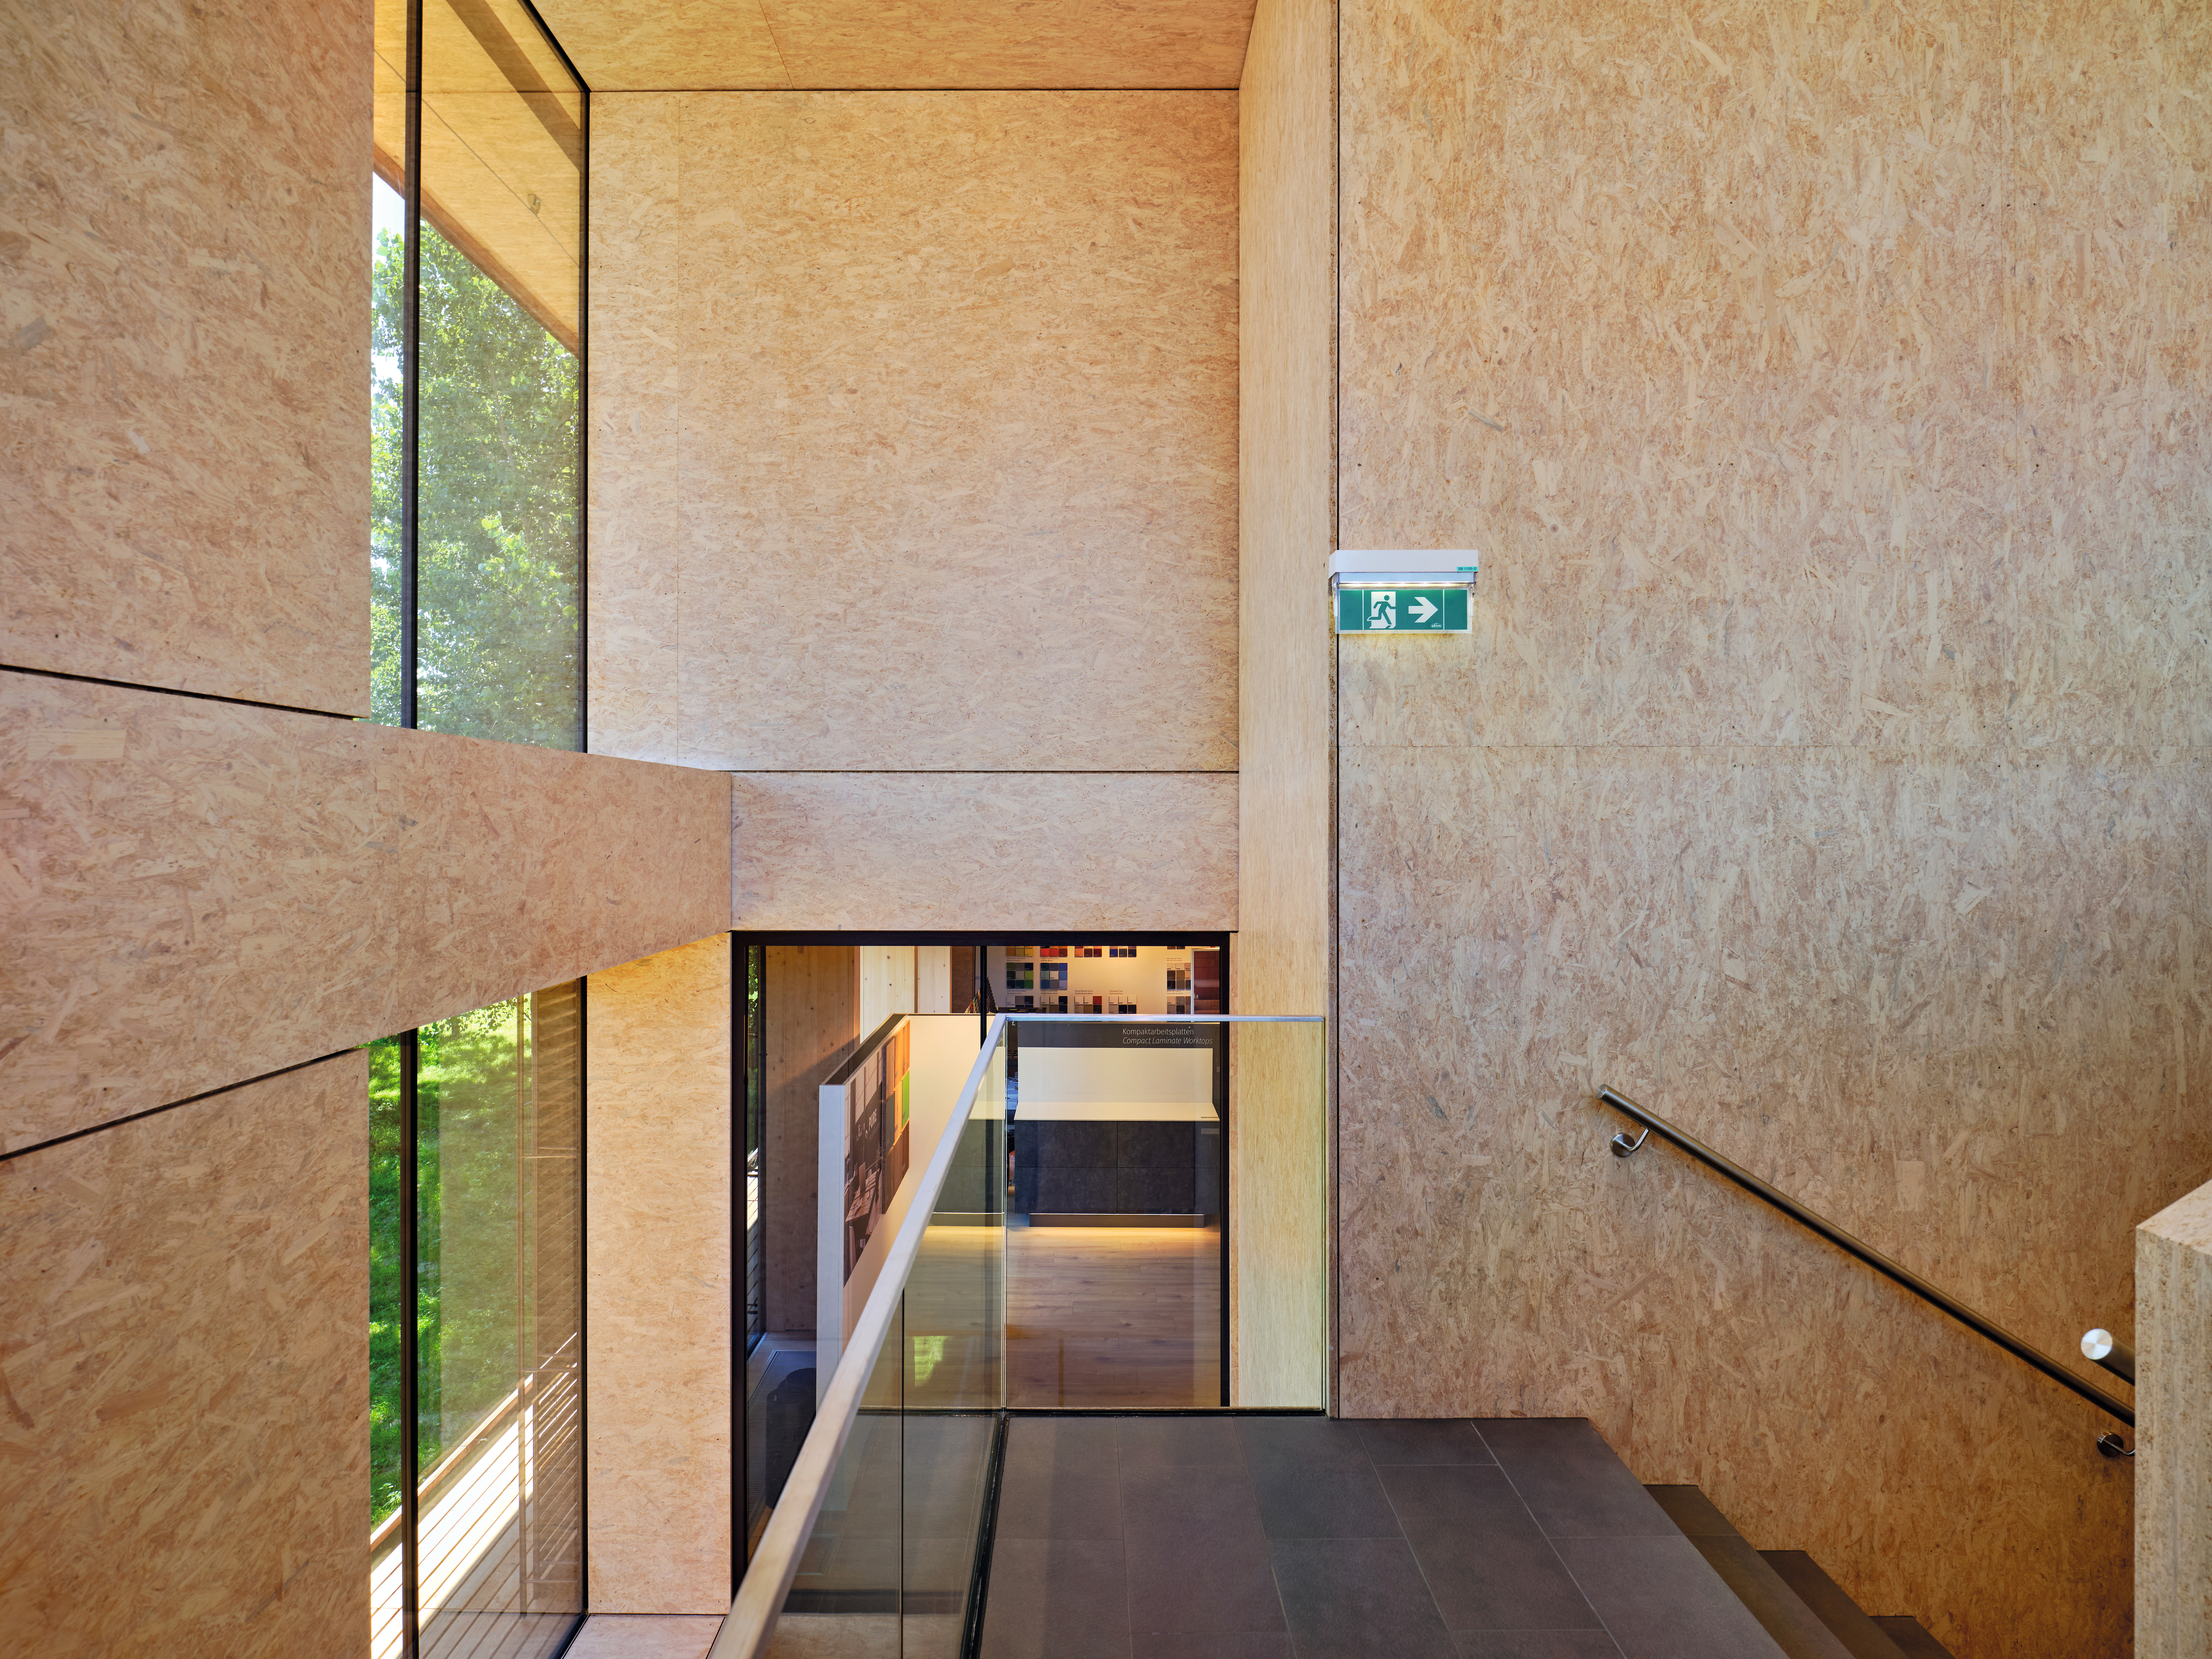 The use of OSB 4 Top boards in the interior gives the rooms a bright appearance.